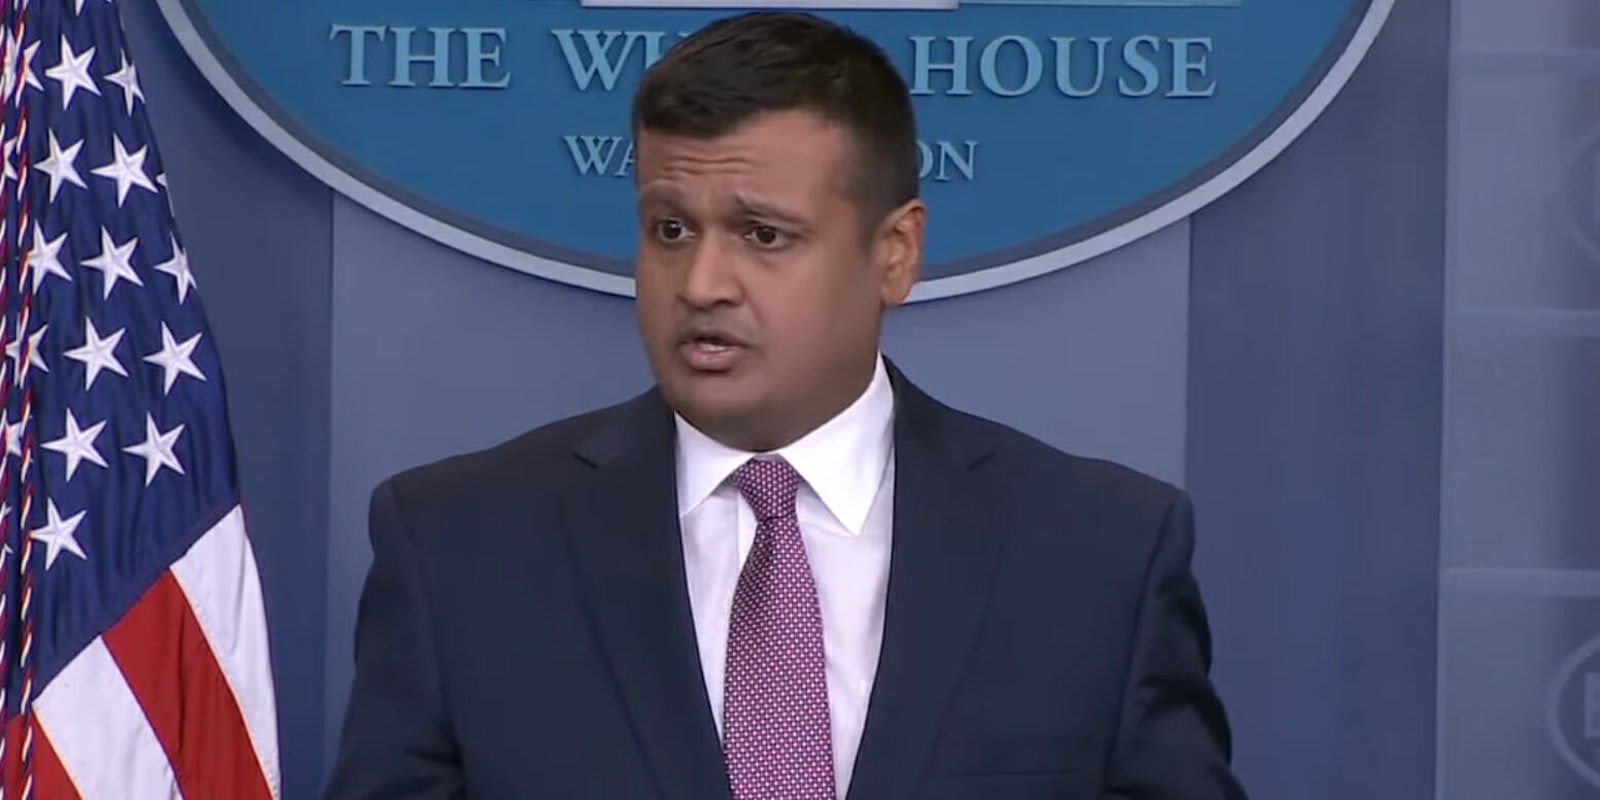 White House spokesperson Raj Shah said the administration should have 'done better' with dealing with the allegations against Rob Porter.